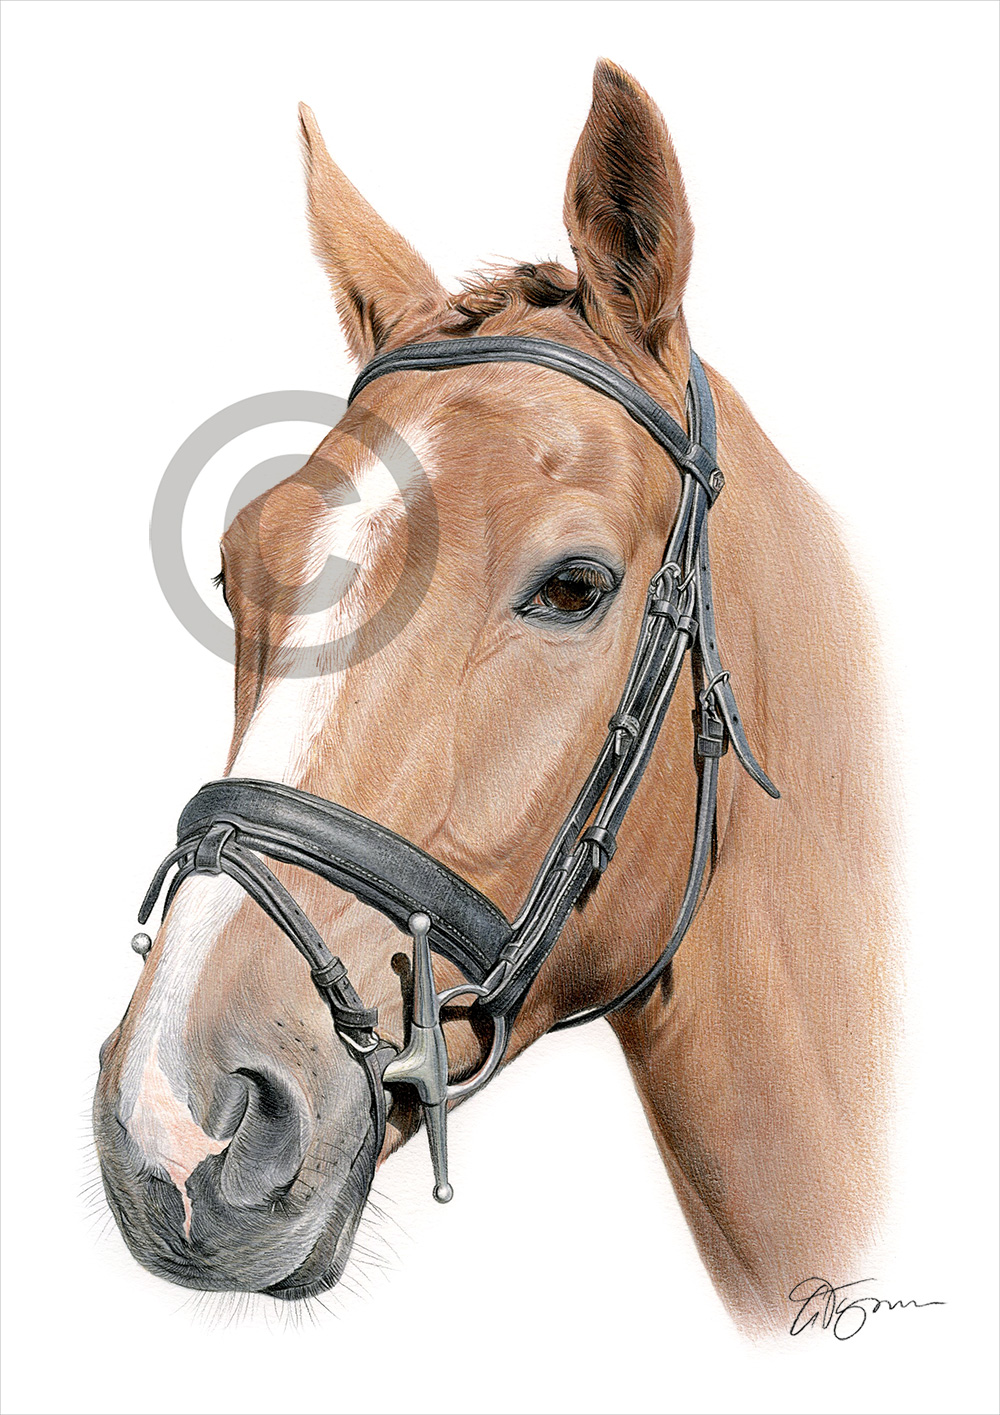 Pencil drawing commission of a horse in colour by artist Gary Tymon